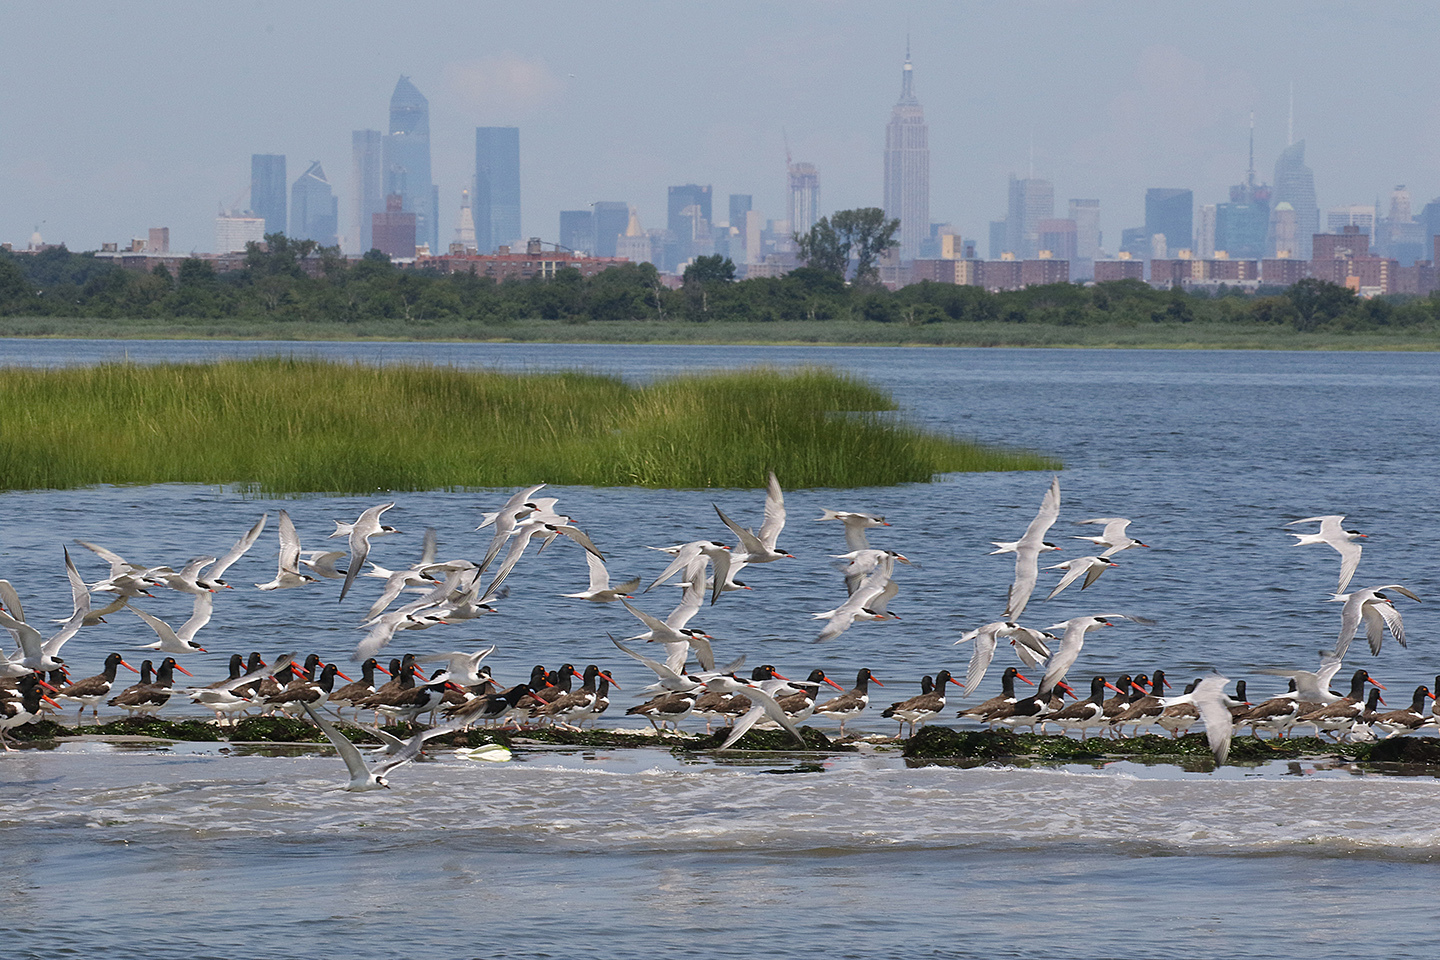 Common Terns and American Oystercatchers gather in Jamaica Bay. Photo: <a href="https://www.facebook.com/don.riepe.14" target="_blank">Don Riepe</a>